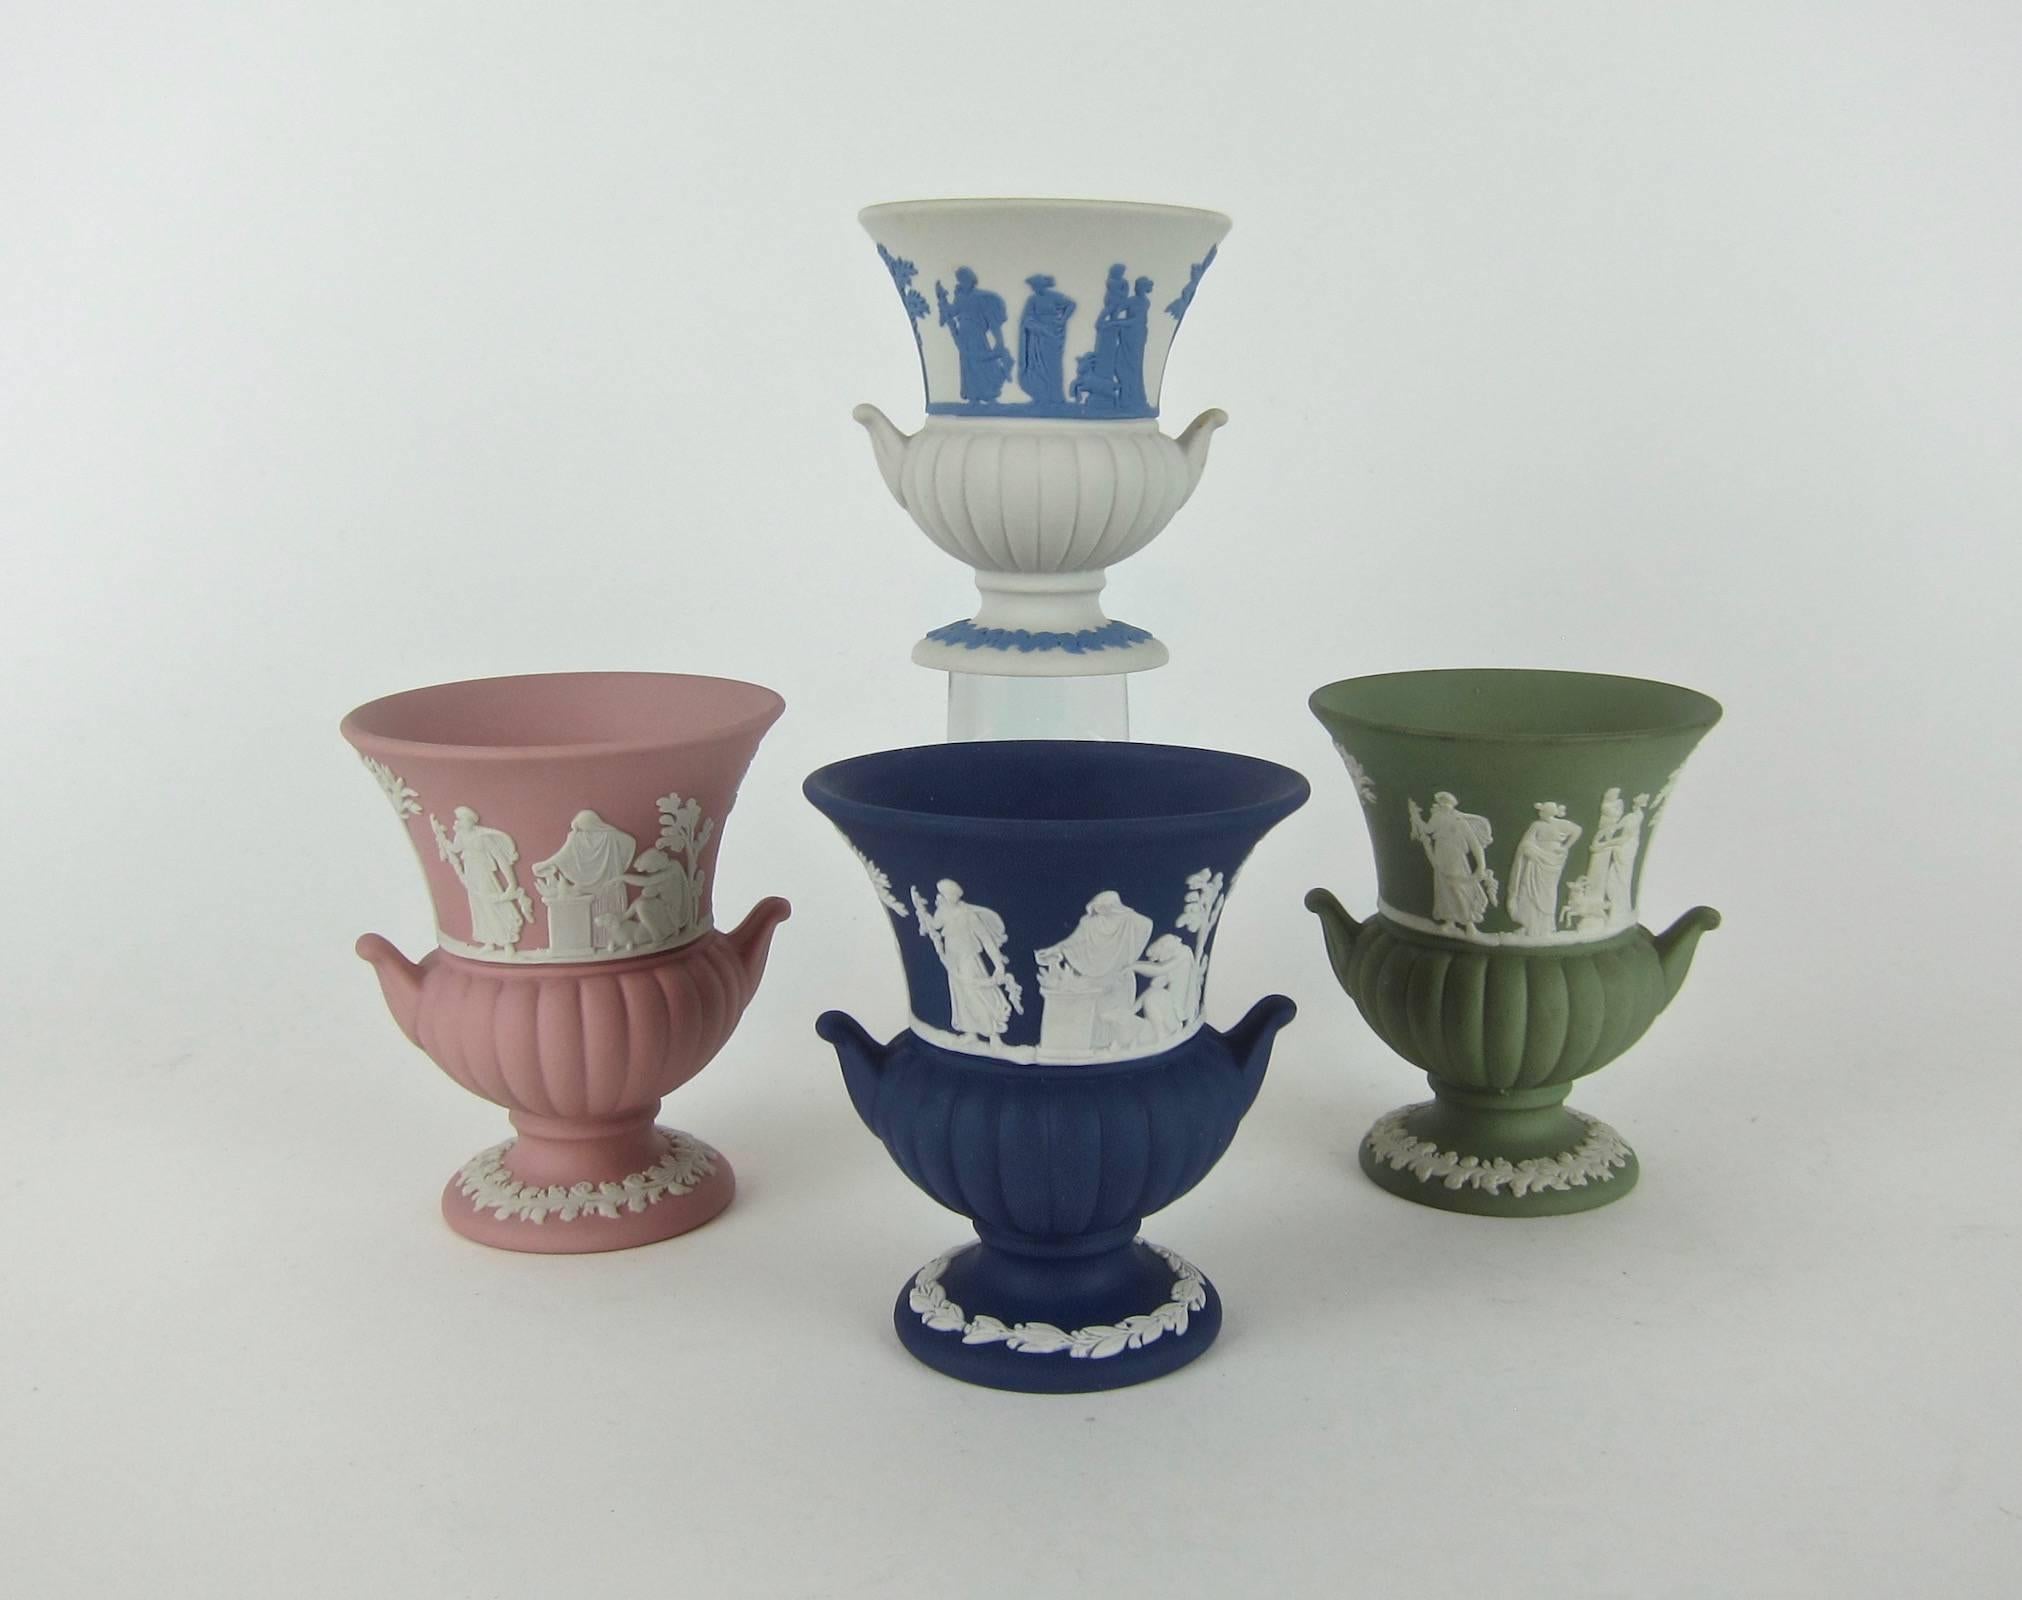 A colorful vintage collection of four small urns in white, sage green, pink, and Portland blue solid Jasperware from Wedgwood of England. The vessels were produced in 1964, 1974, 1978, and 1982.

Each decorated with neoclassical bas-relief figures,